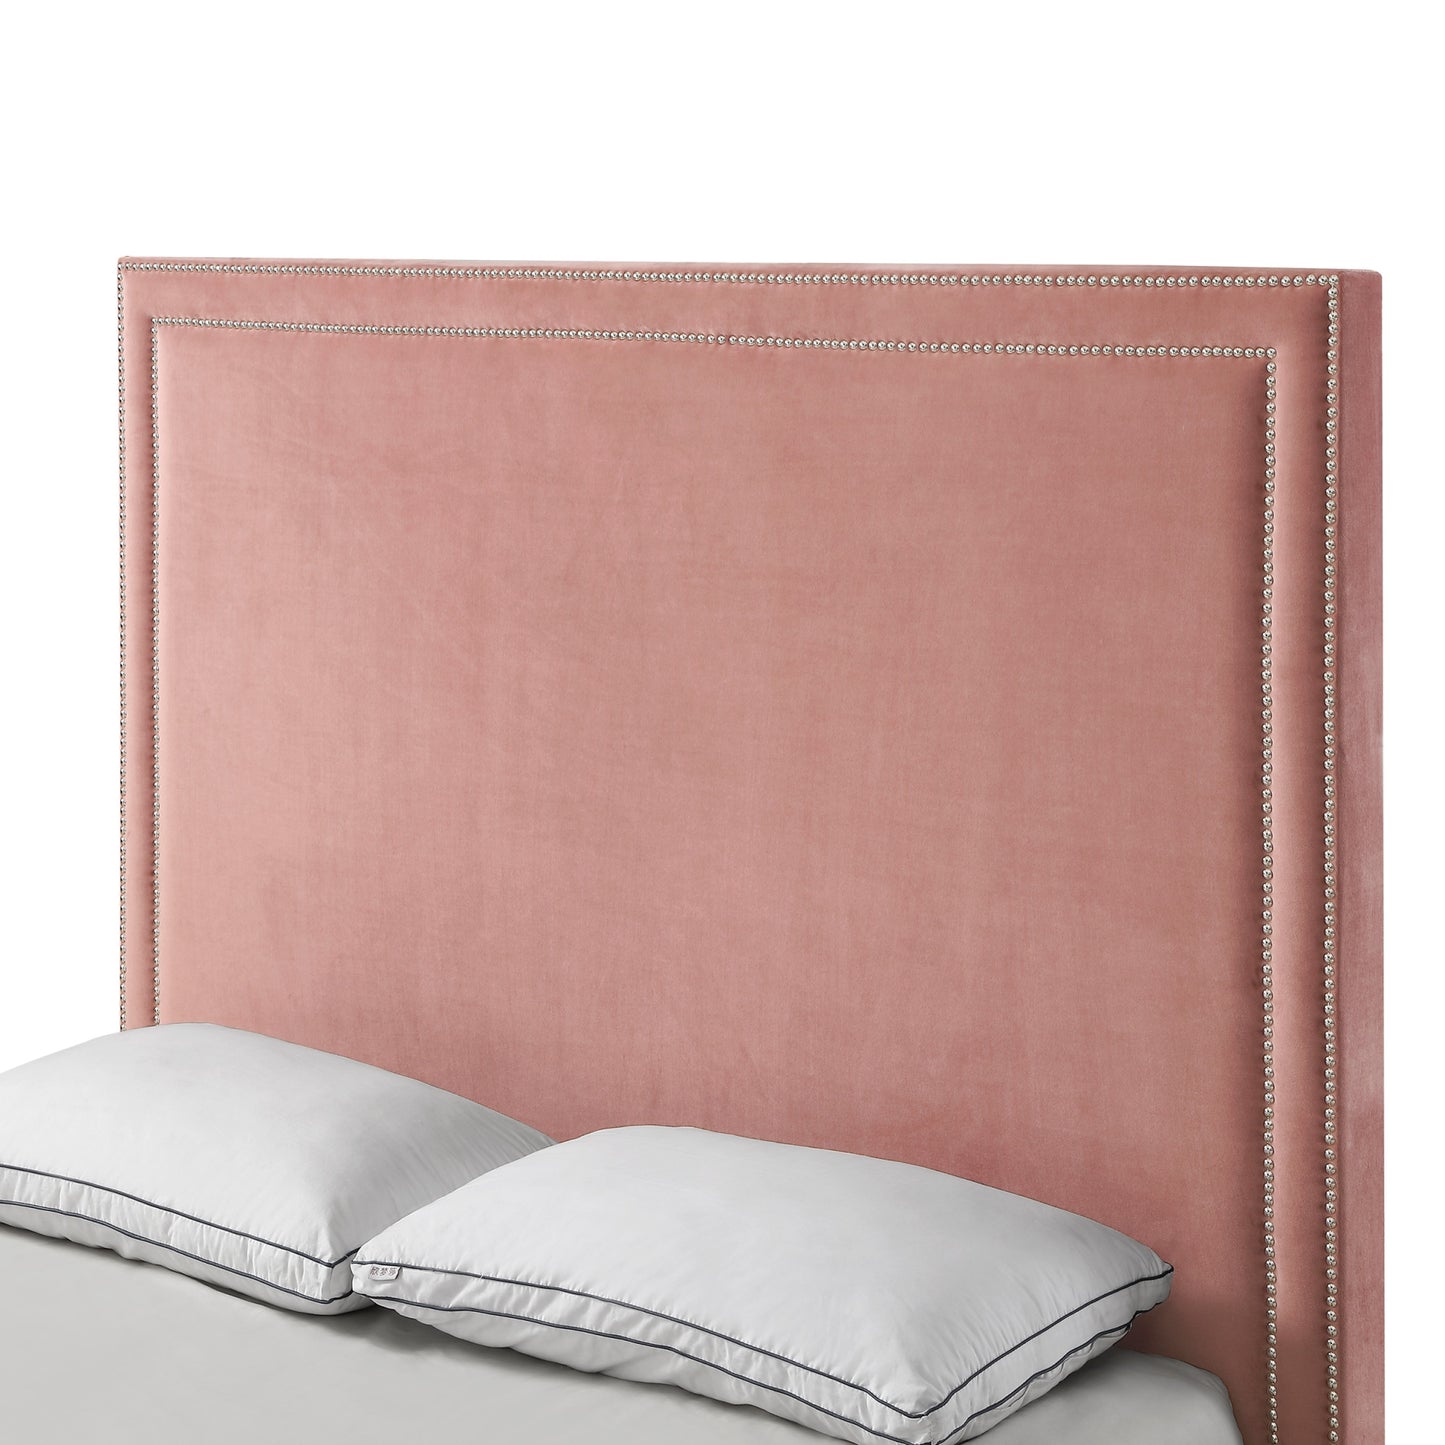 Blush Solid Wood Queen Upholstered Velvet Bed with Nailhead Trim